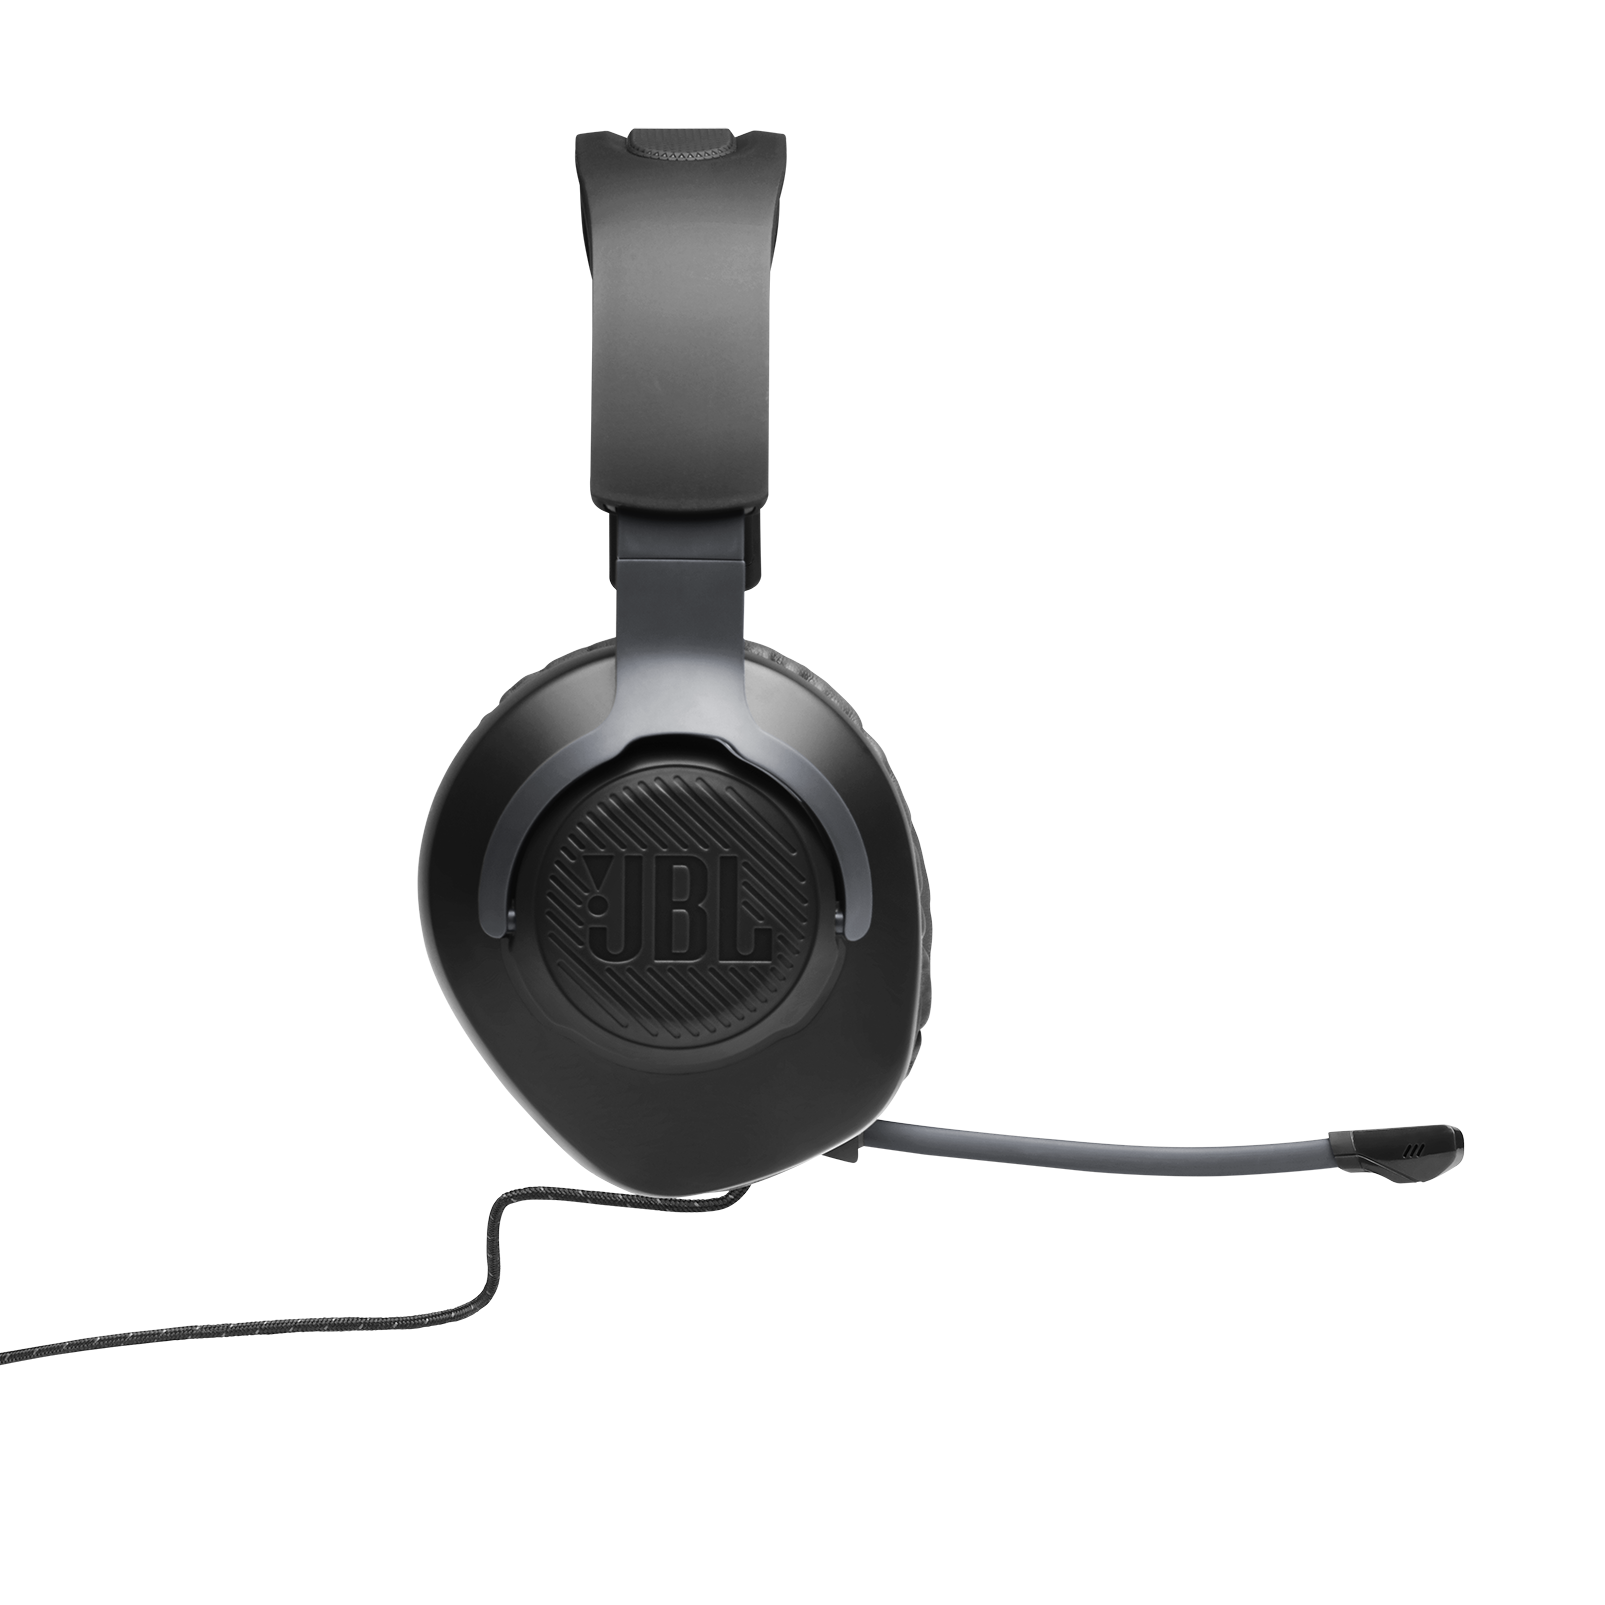 JBL Quantum 100 - Black - Wired over-ear gaming headset with flip-up mic - Detailshot 6